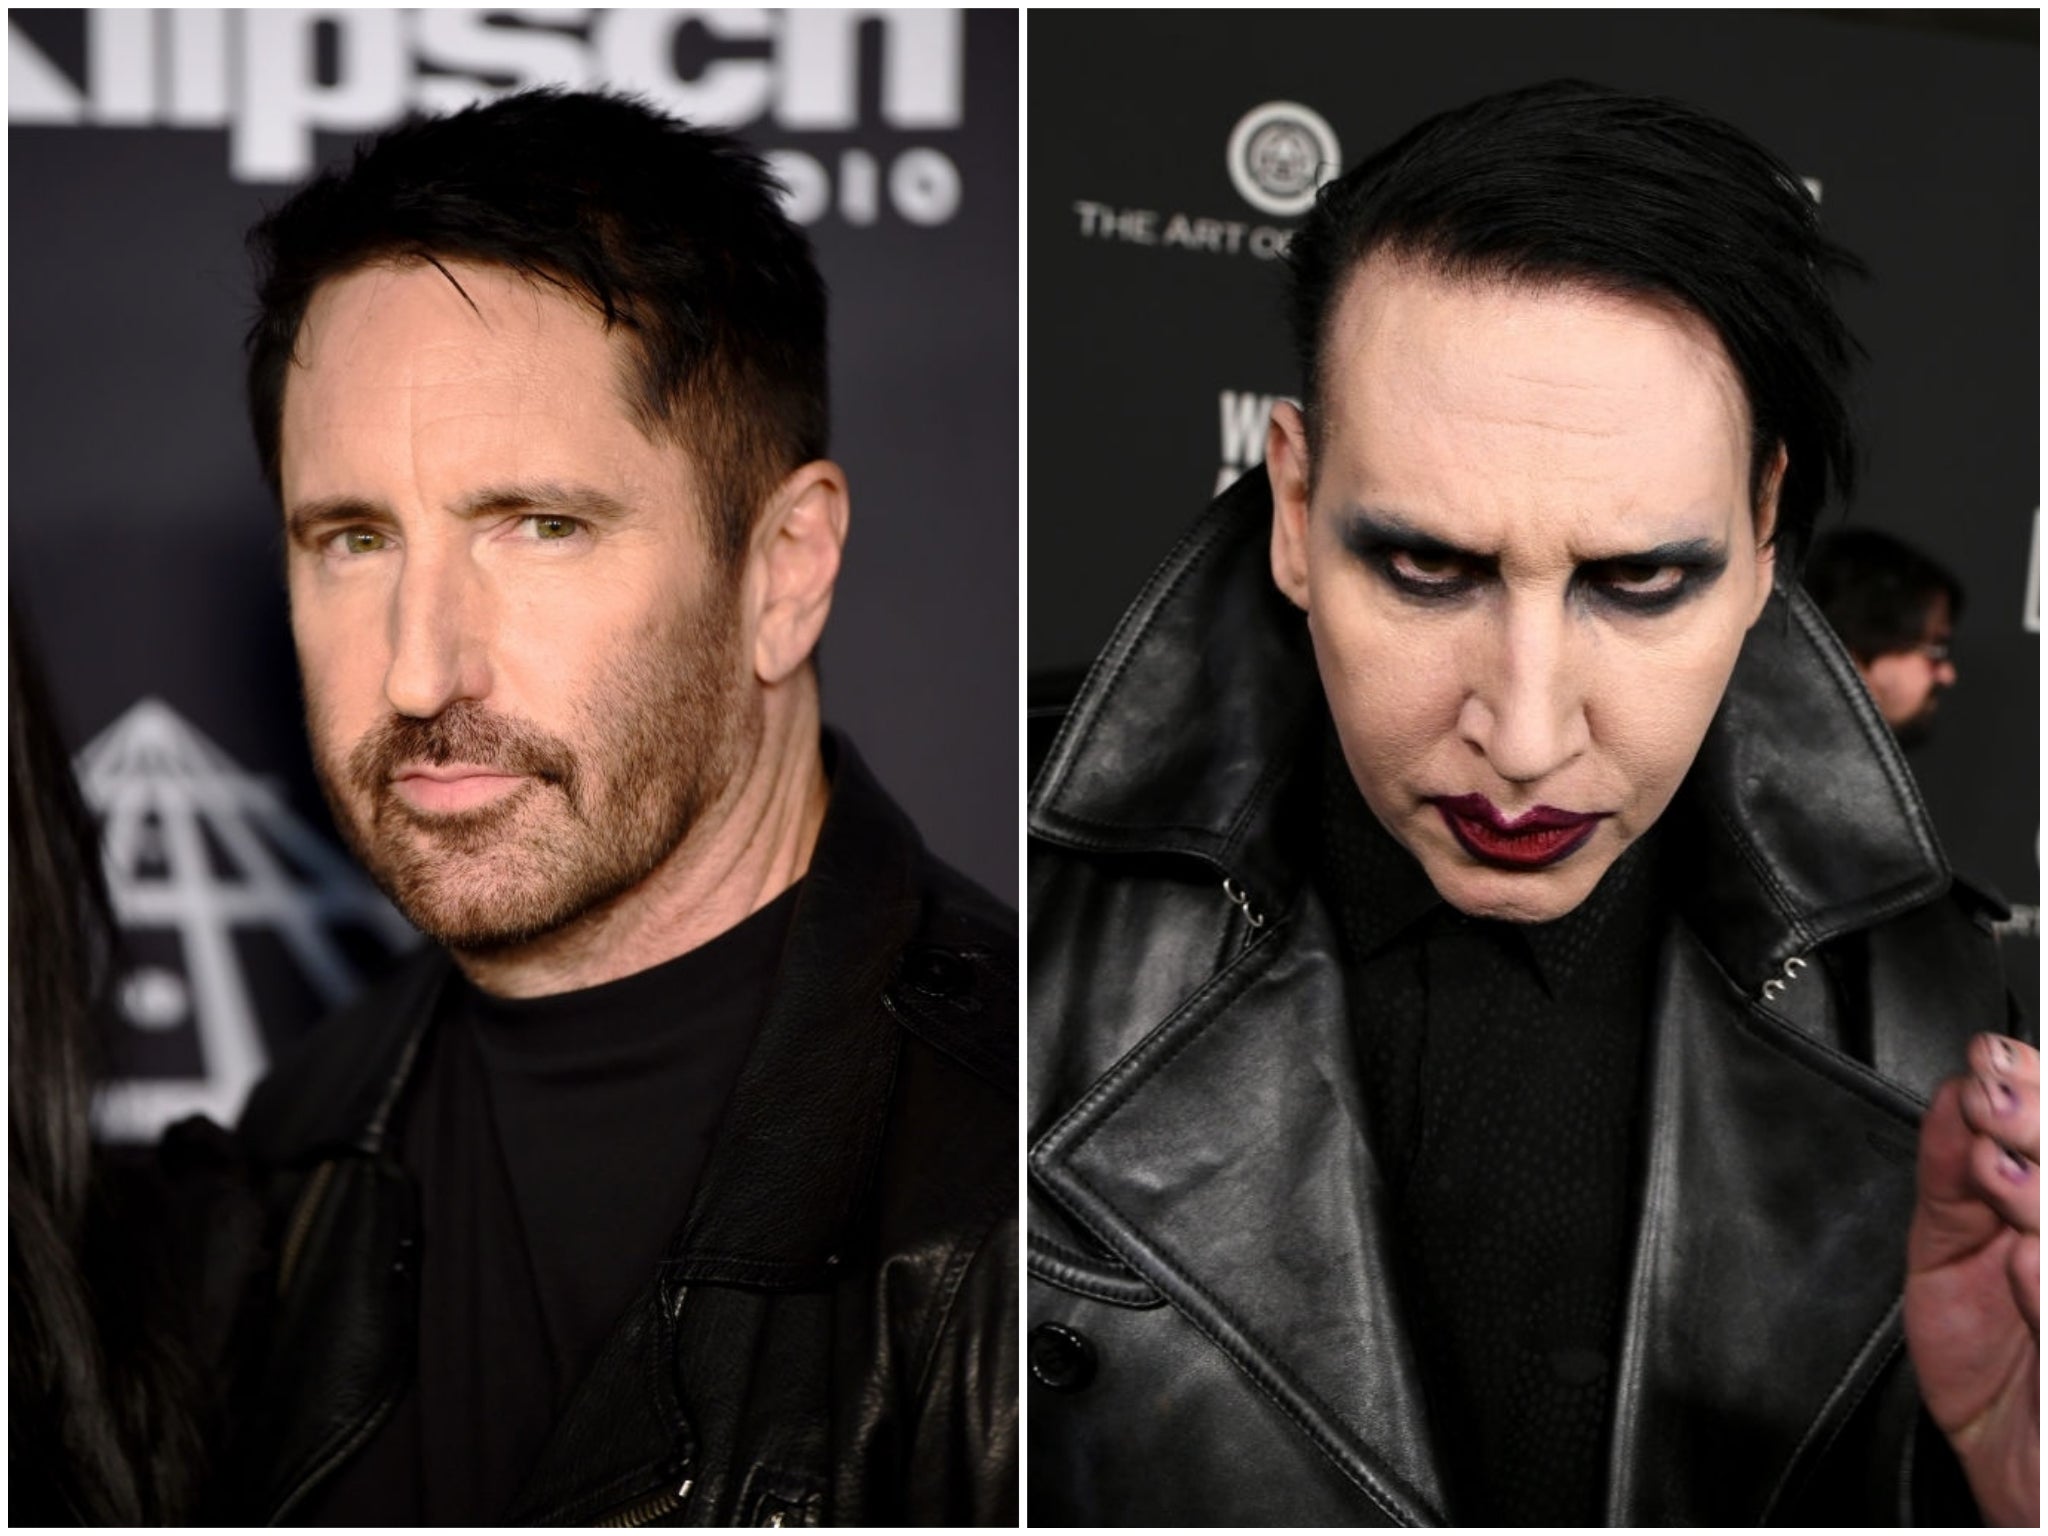 Trent Reznor and Marilyn Manson